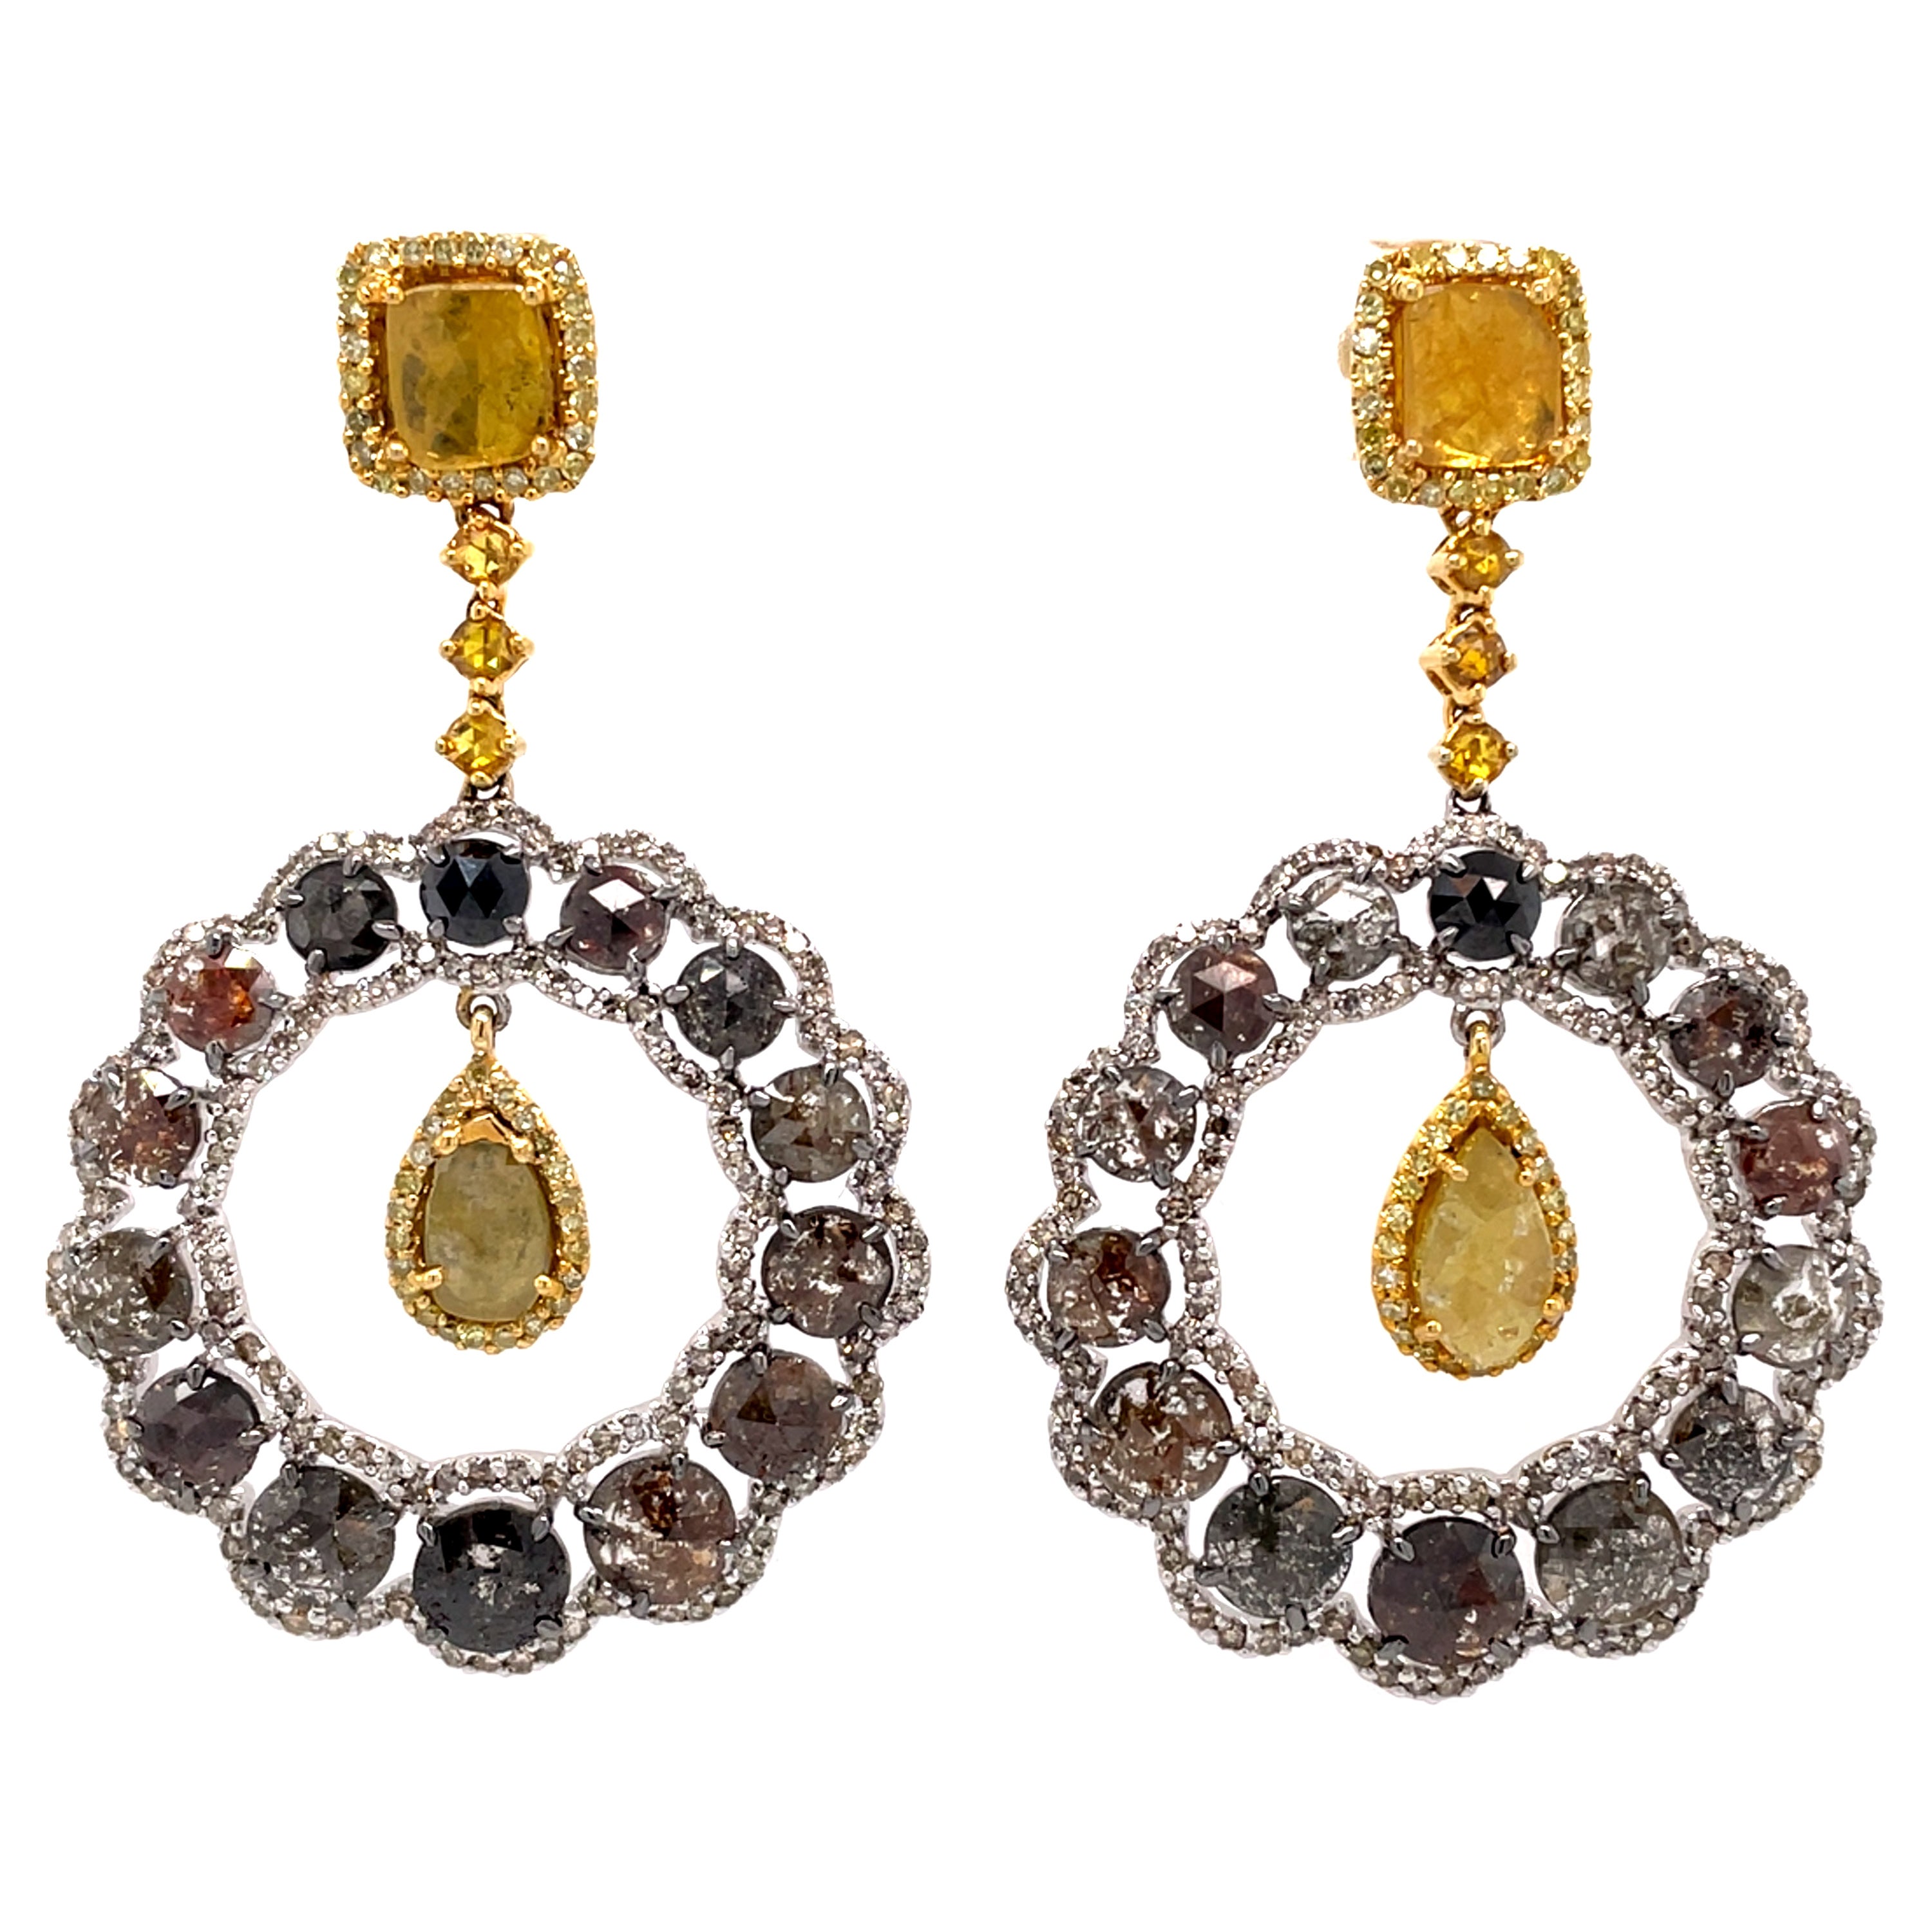 14Kt Yellow Gold and 14Kt White Gold 11.43 Carat Diamond Chandelier Earrings